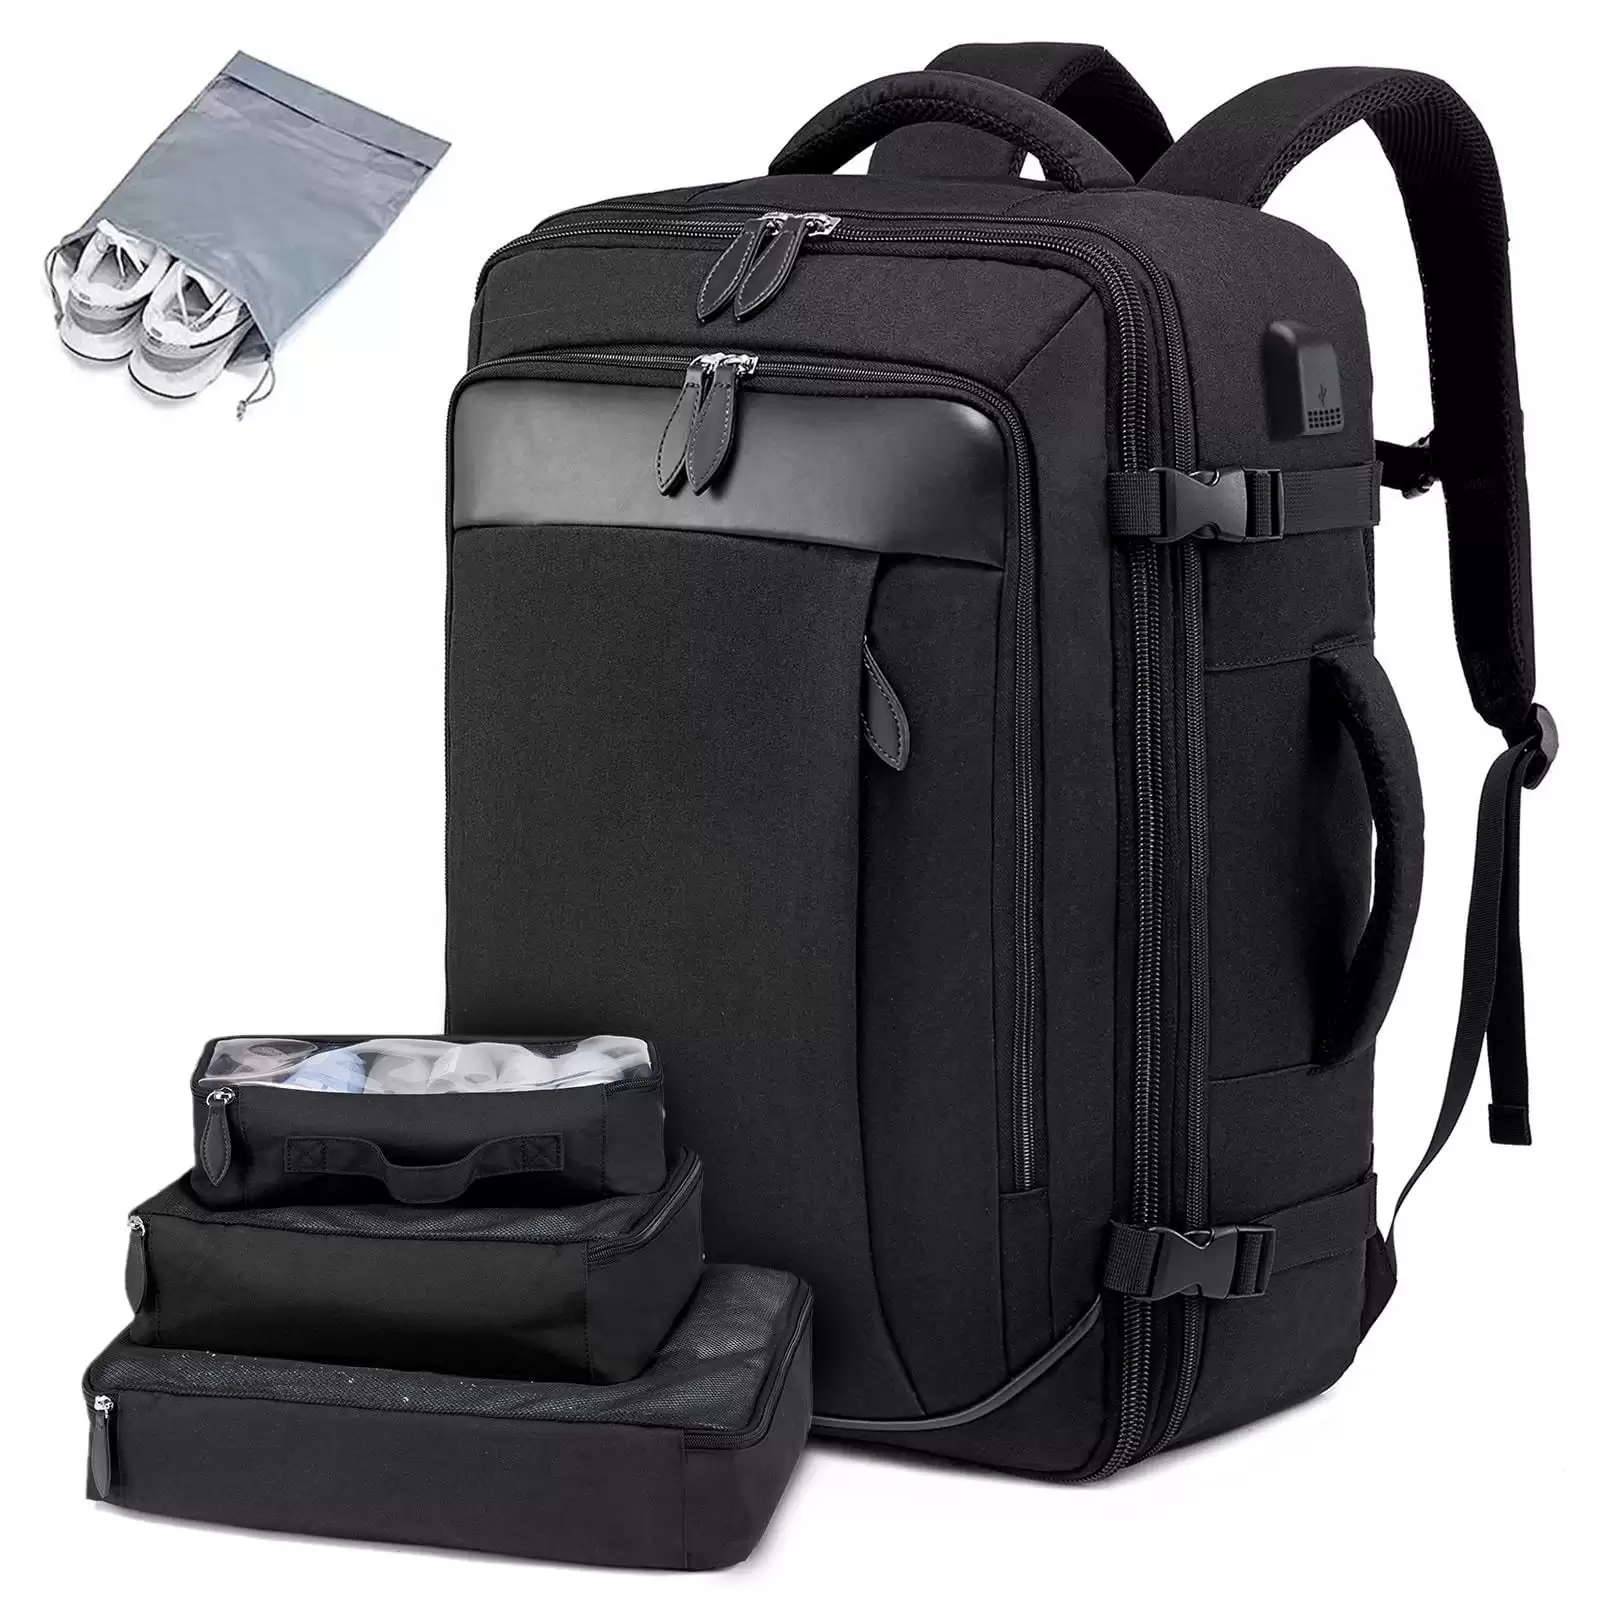 Pay Only € 29.99 For Carry On Backpack For Airplanes With This Discount Coupon At Cafago